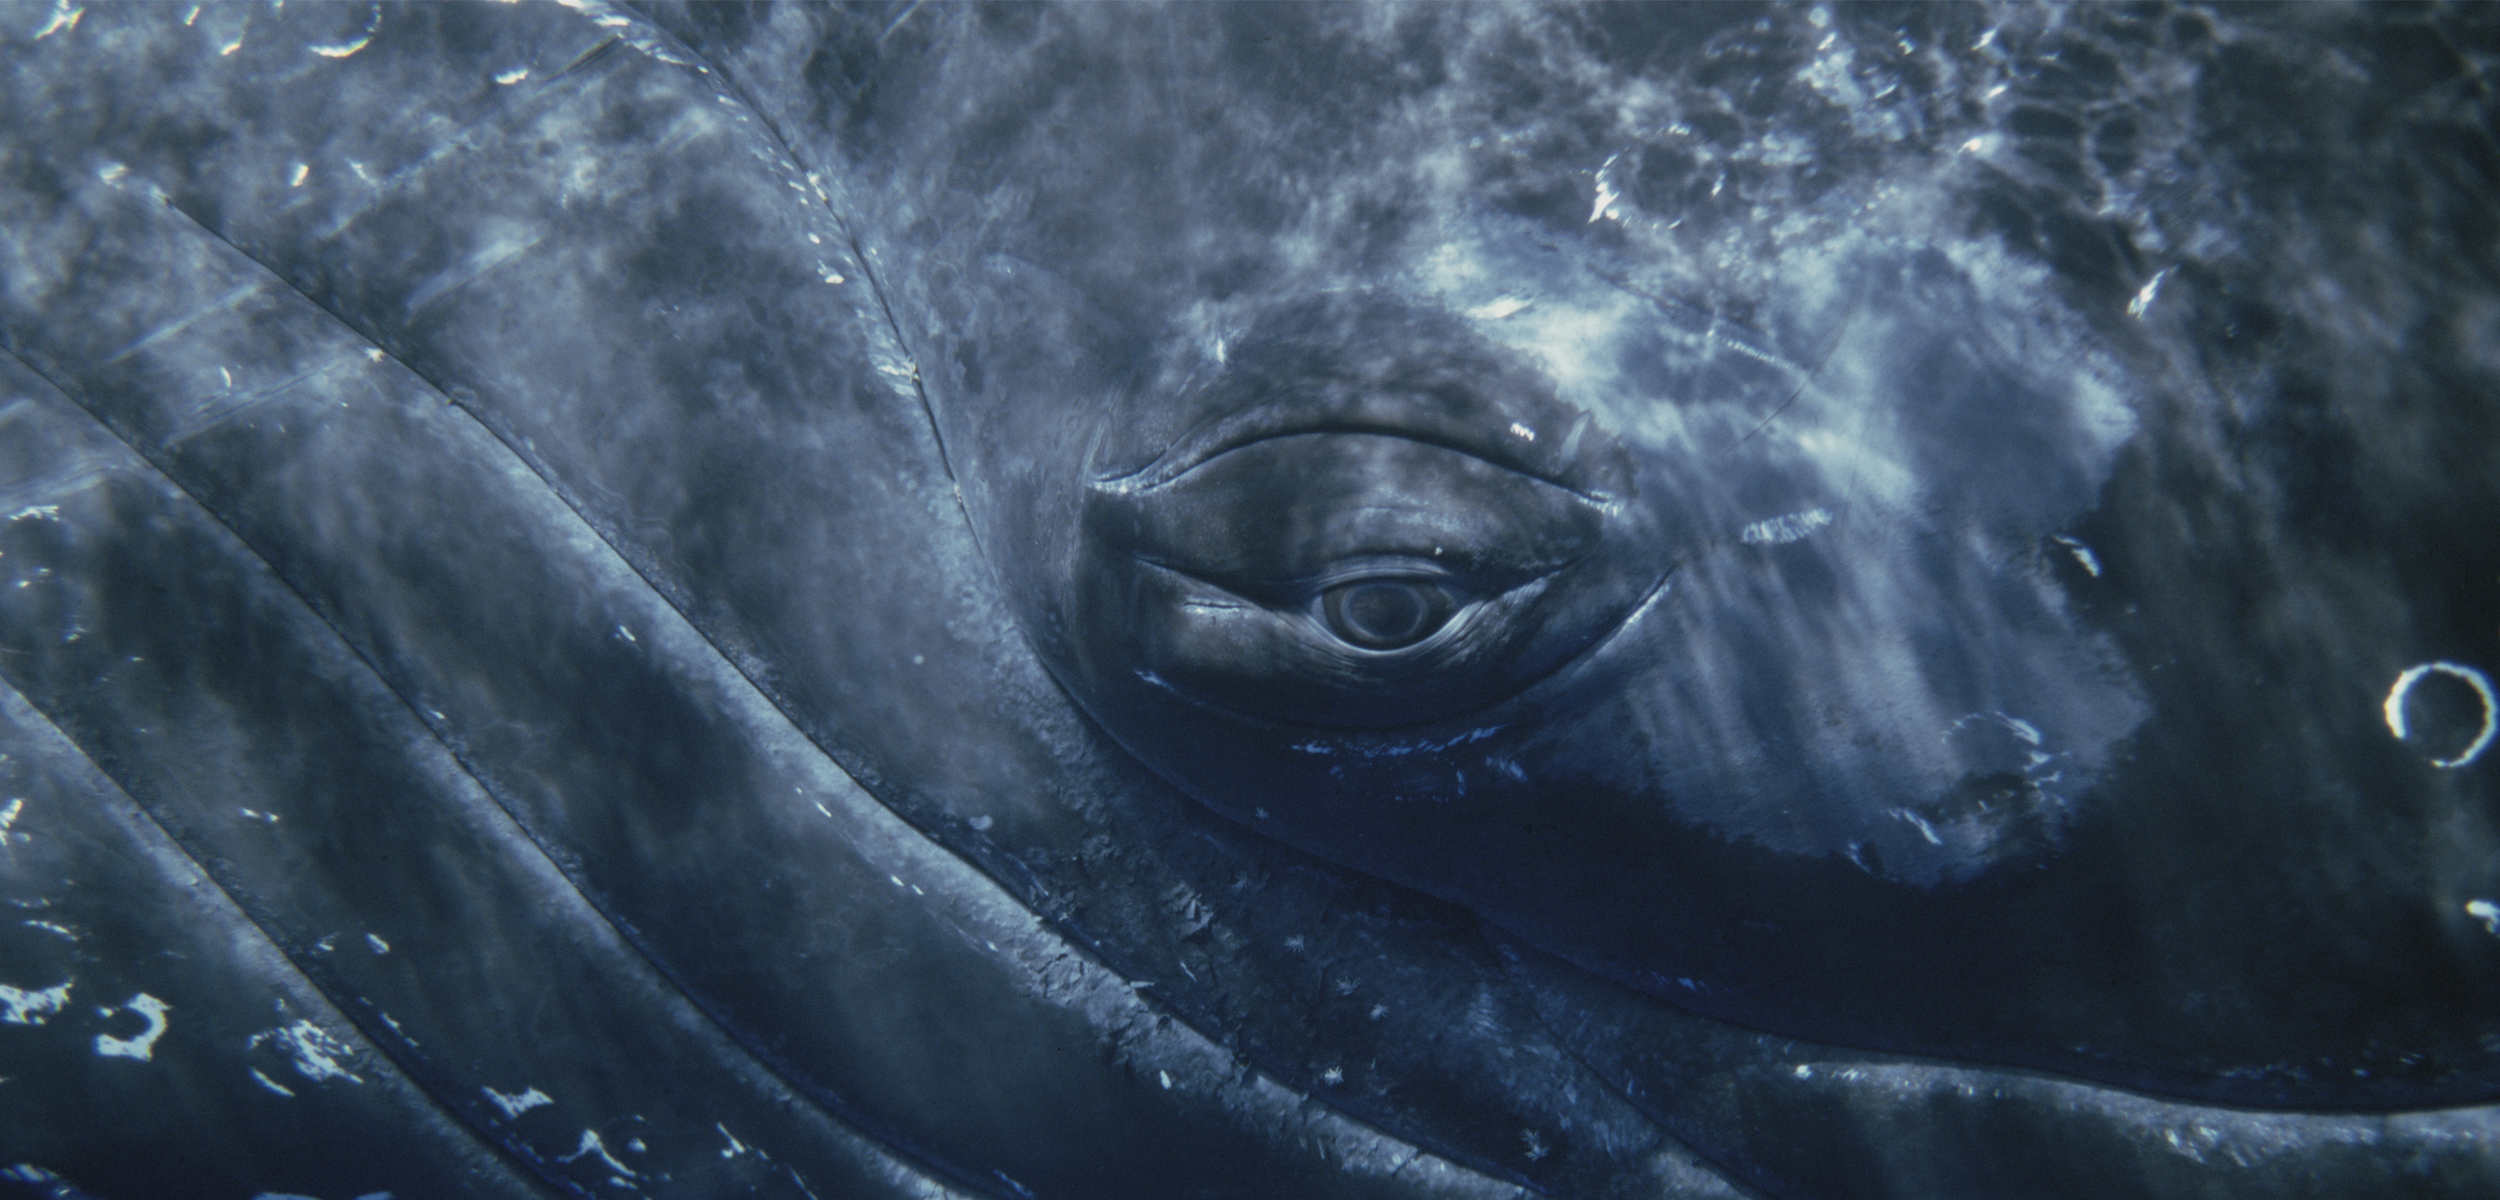 A close up shot of a whale eye. The image is dark blue and has wrinkles along the whales body